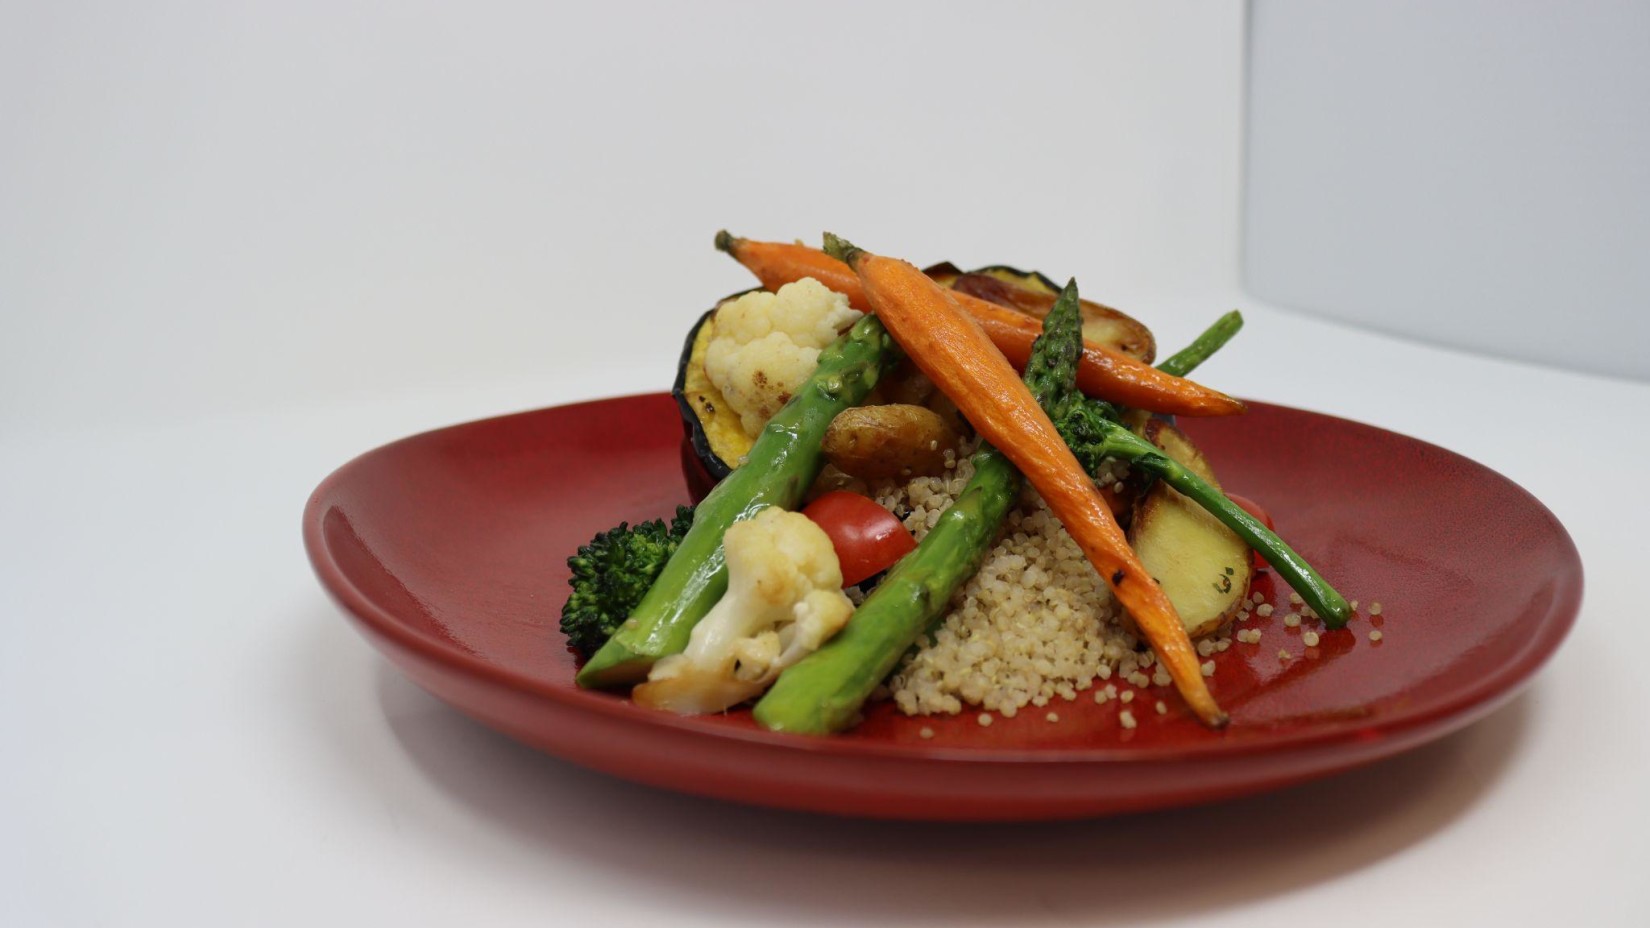 A plate of grilled vegetables and quinoa on a red plate against a white background.